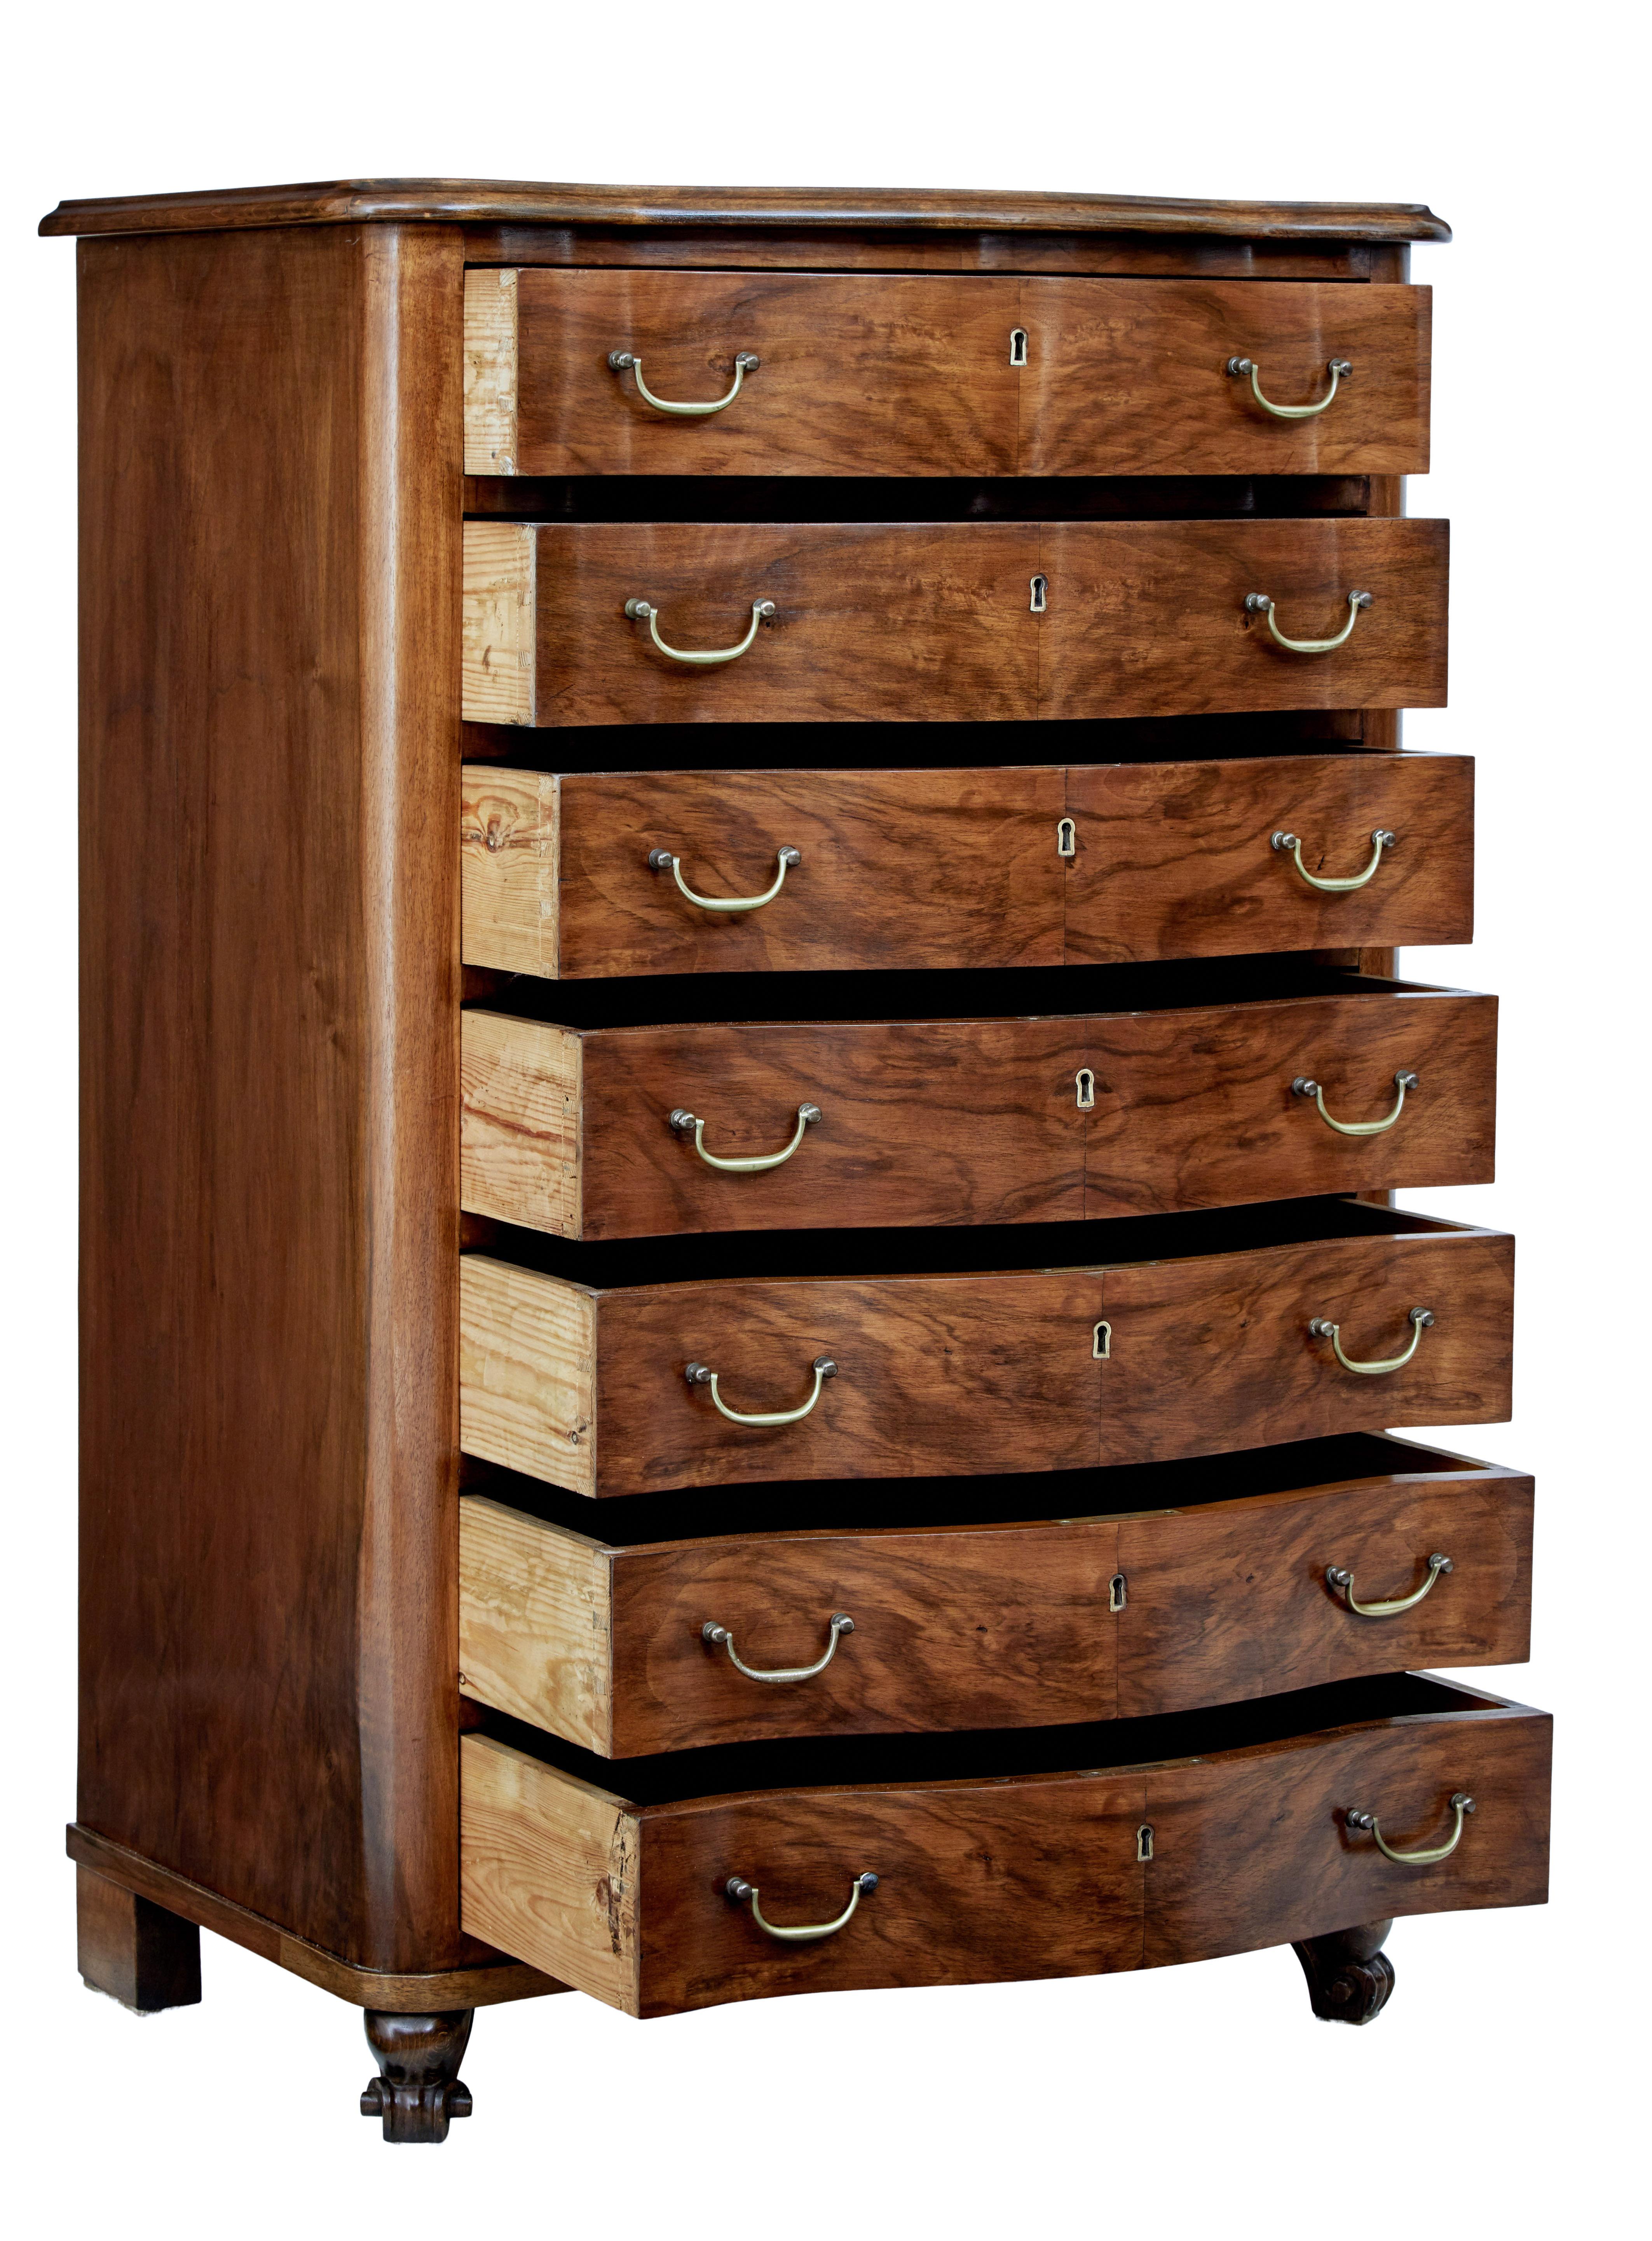 Mid-20th century walnut tall chest of drawers, circa 1950.

Fine quality serpentine shaped 7 drawer chest. All drawers of equal proportions with burr walnut veneers, each fitted with brass swan neck handles.

Standing on carved front legs, with